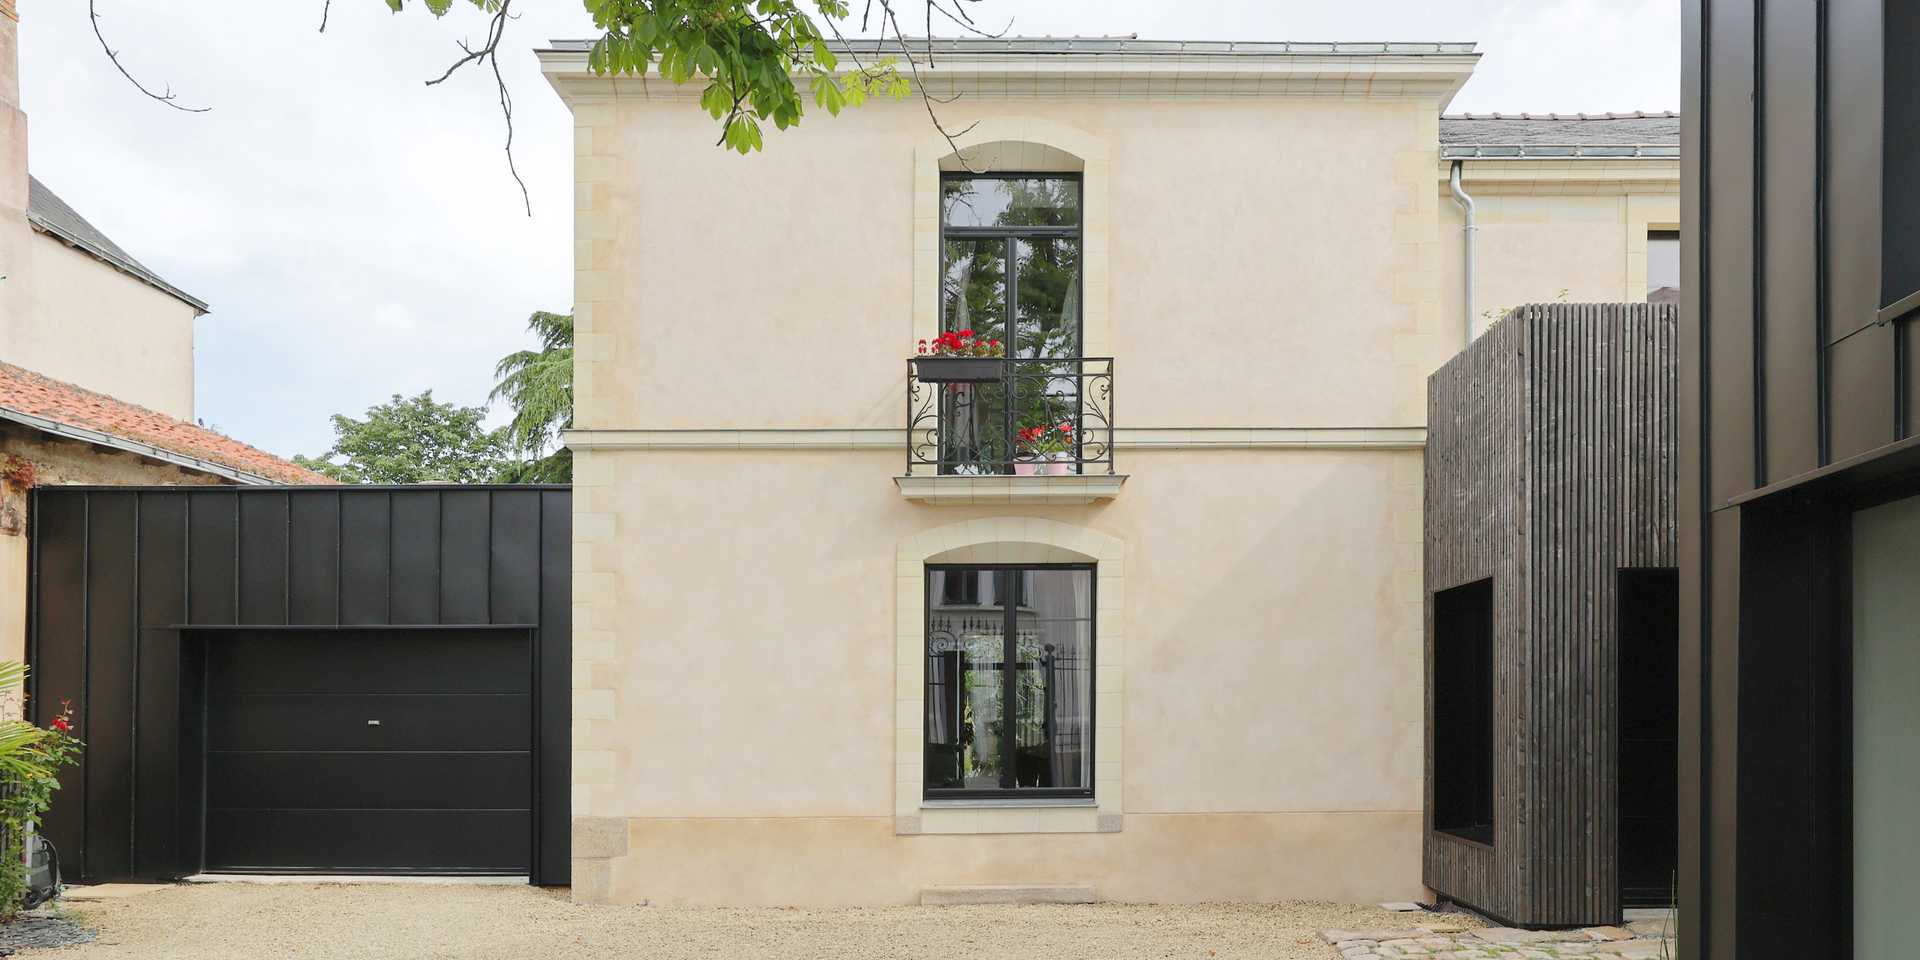 Extension of a house designed by an architect from the Marseille region